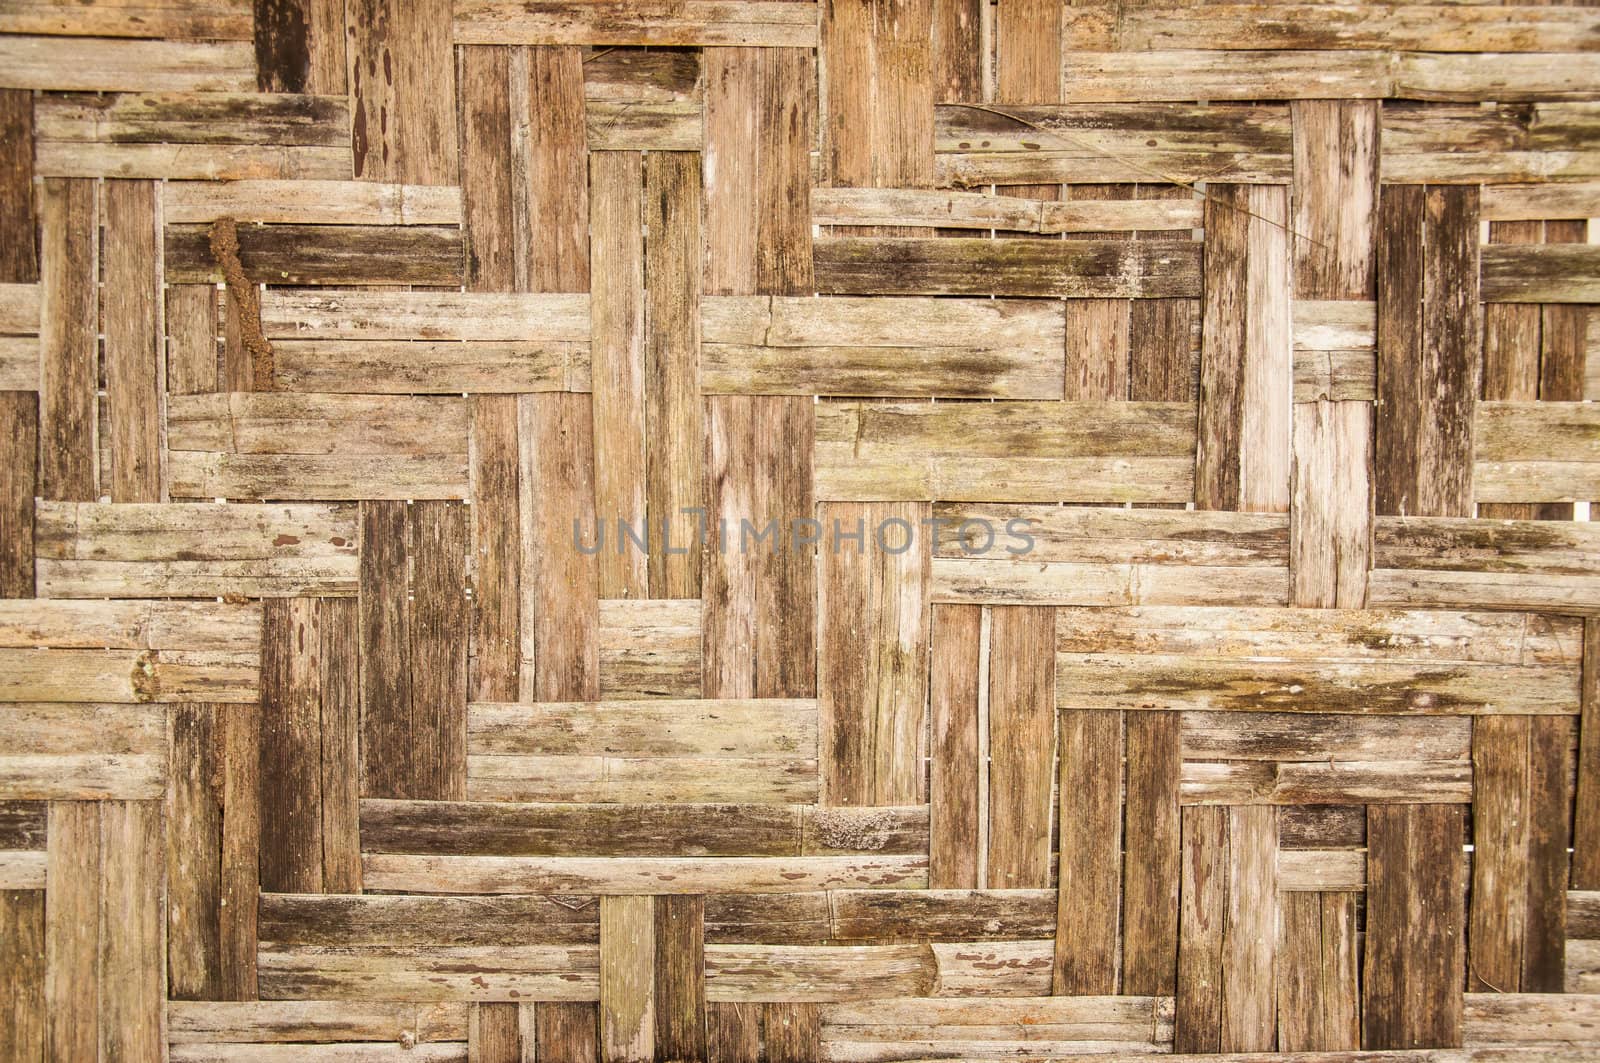 Wood weave for the background.